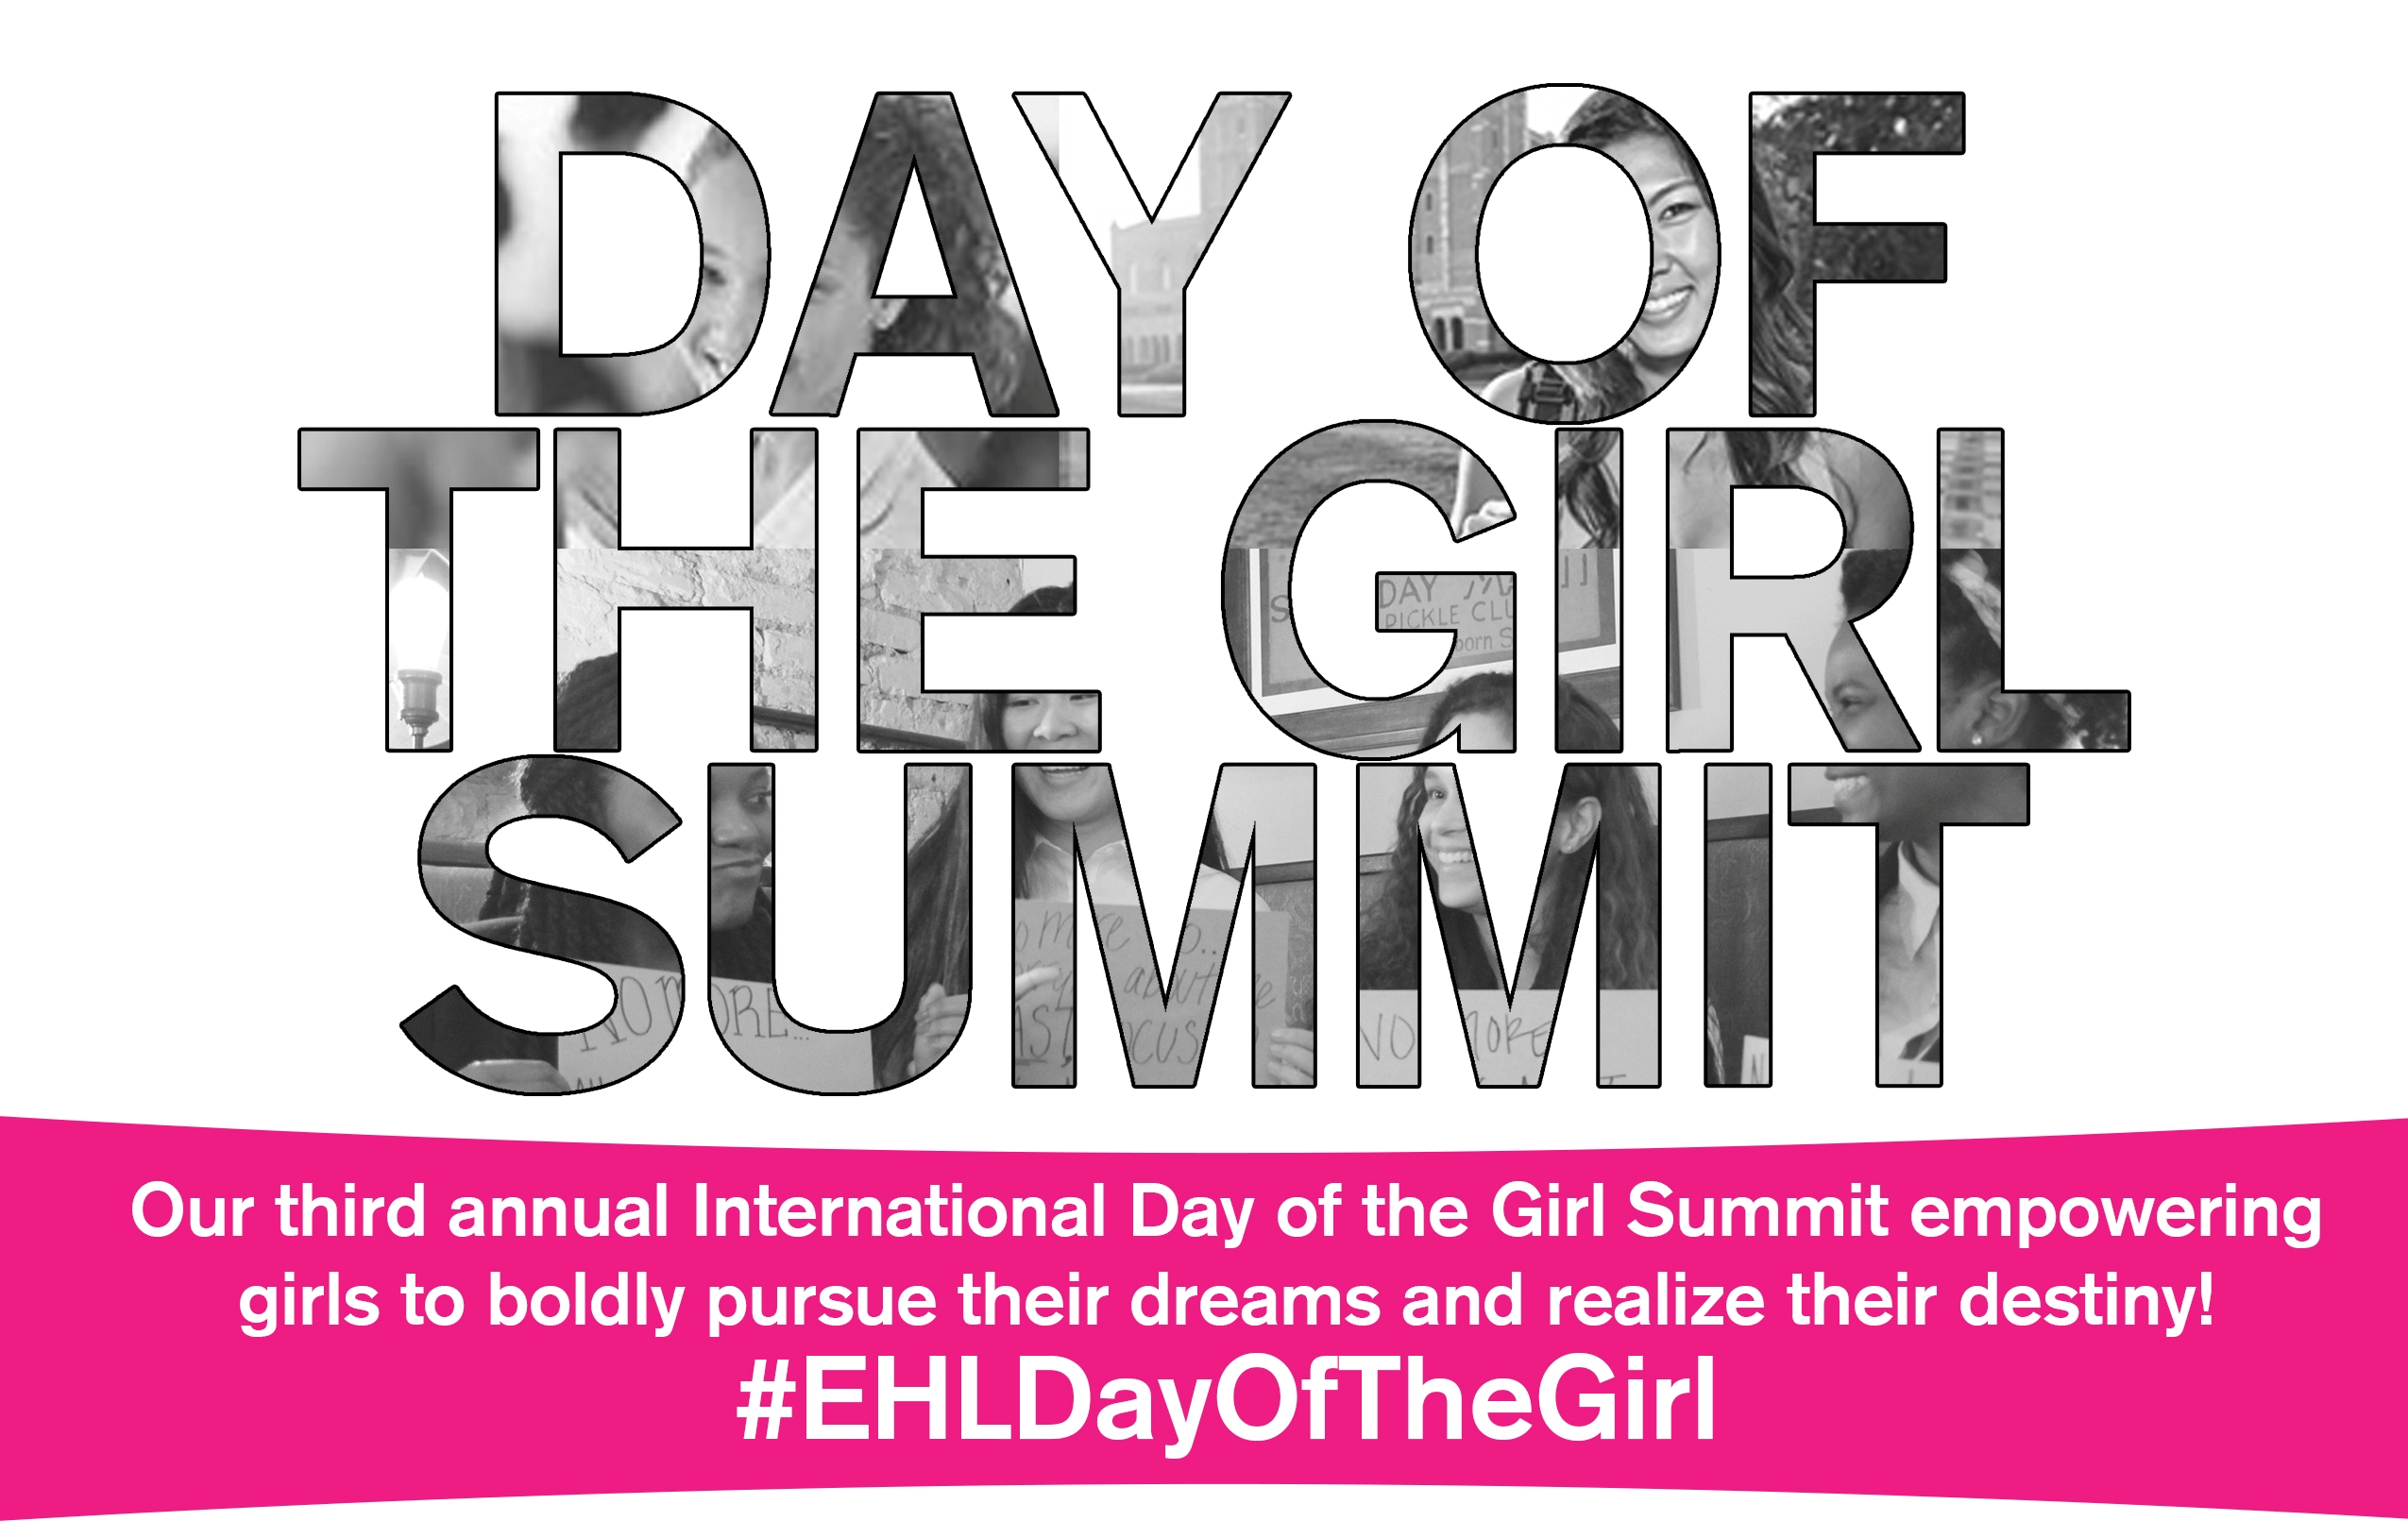 Event Recap: Our 3rd Annual Day of the Girl Summit!